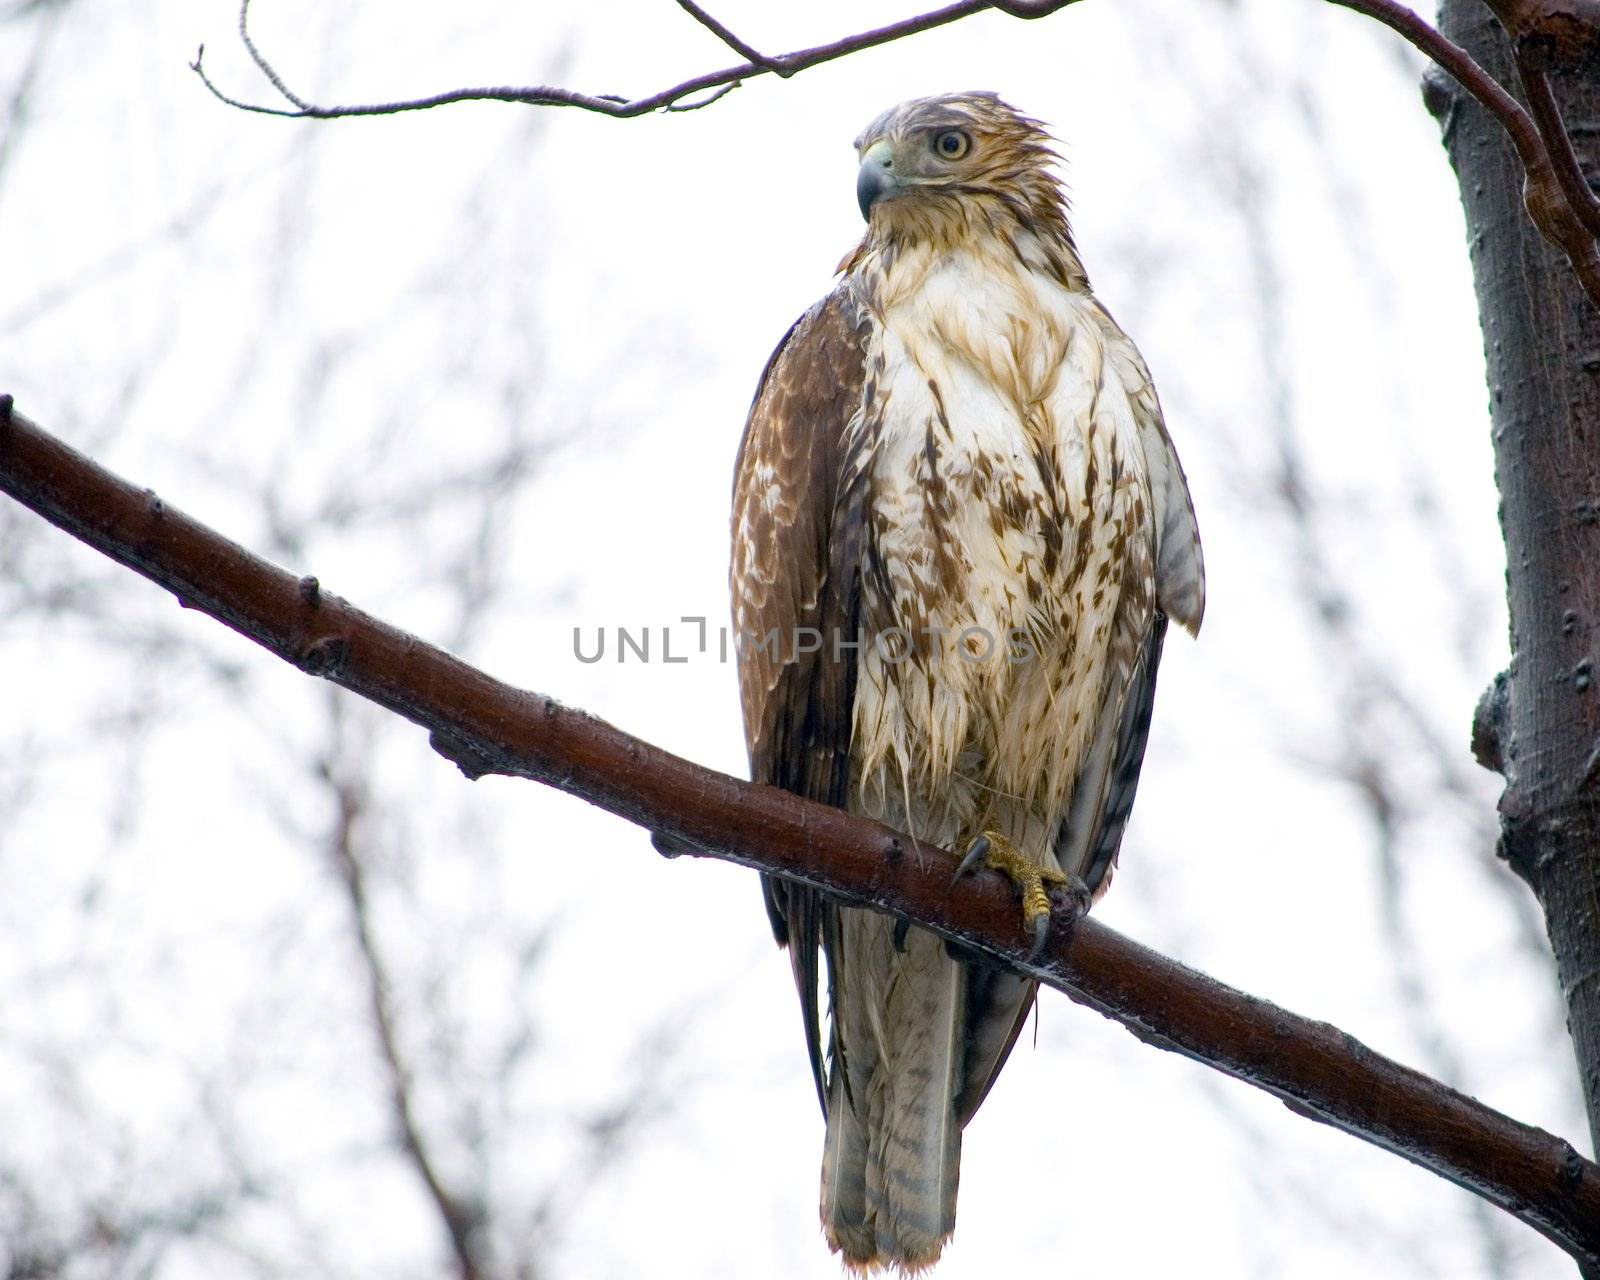 A red-tailed hawk perched on a tree branch in the rain getting soaked.